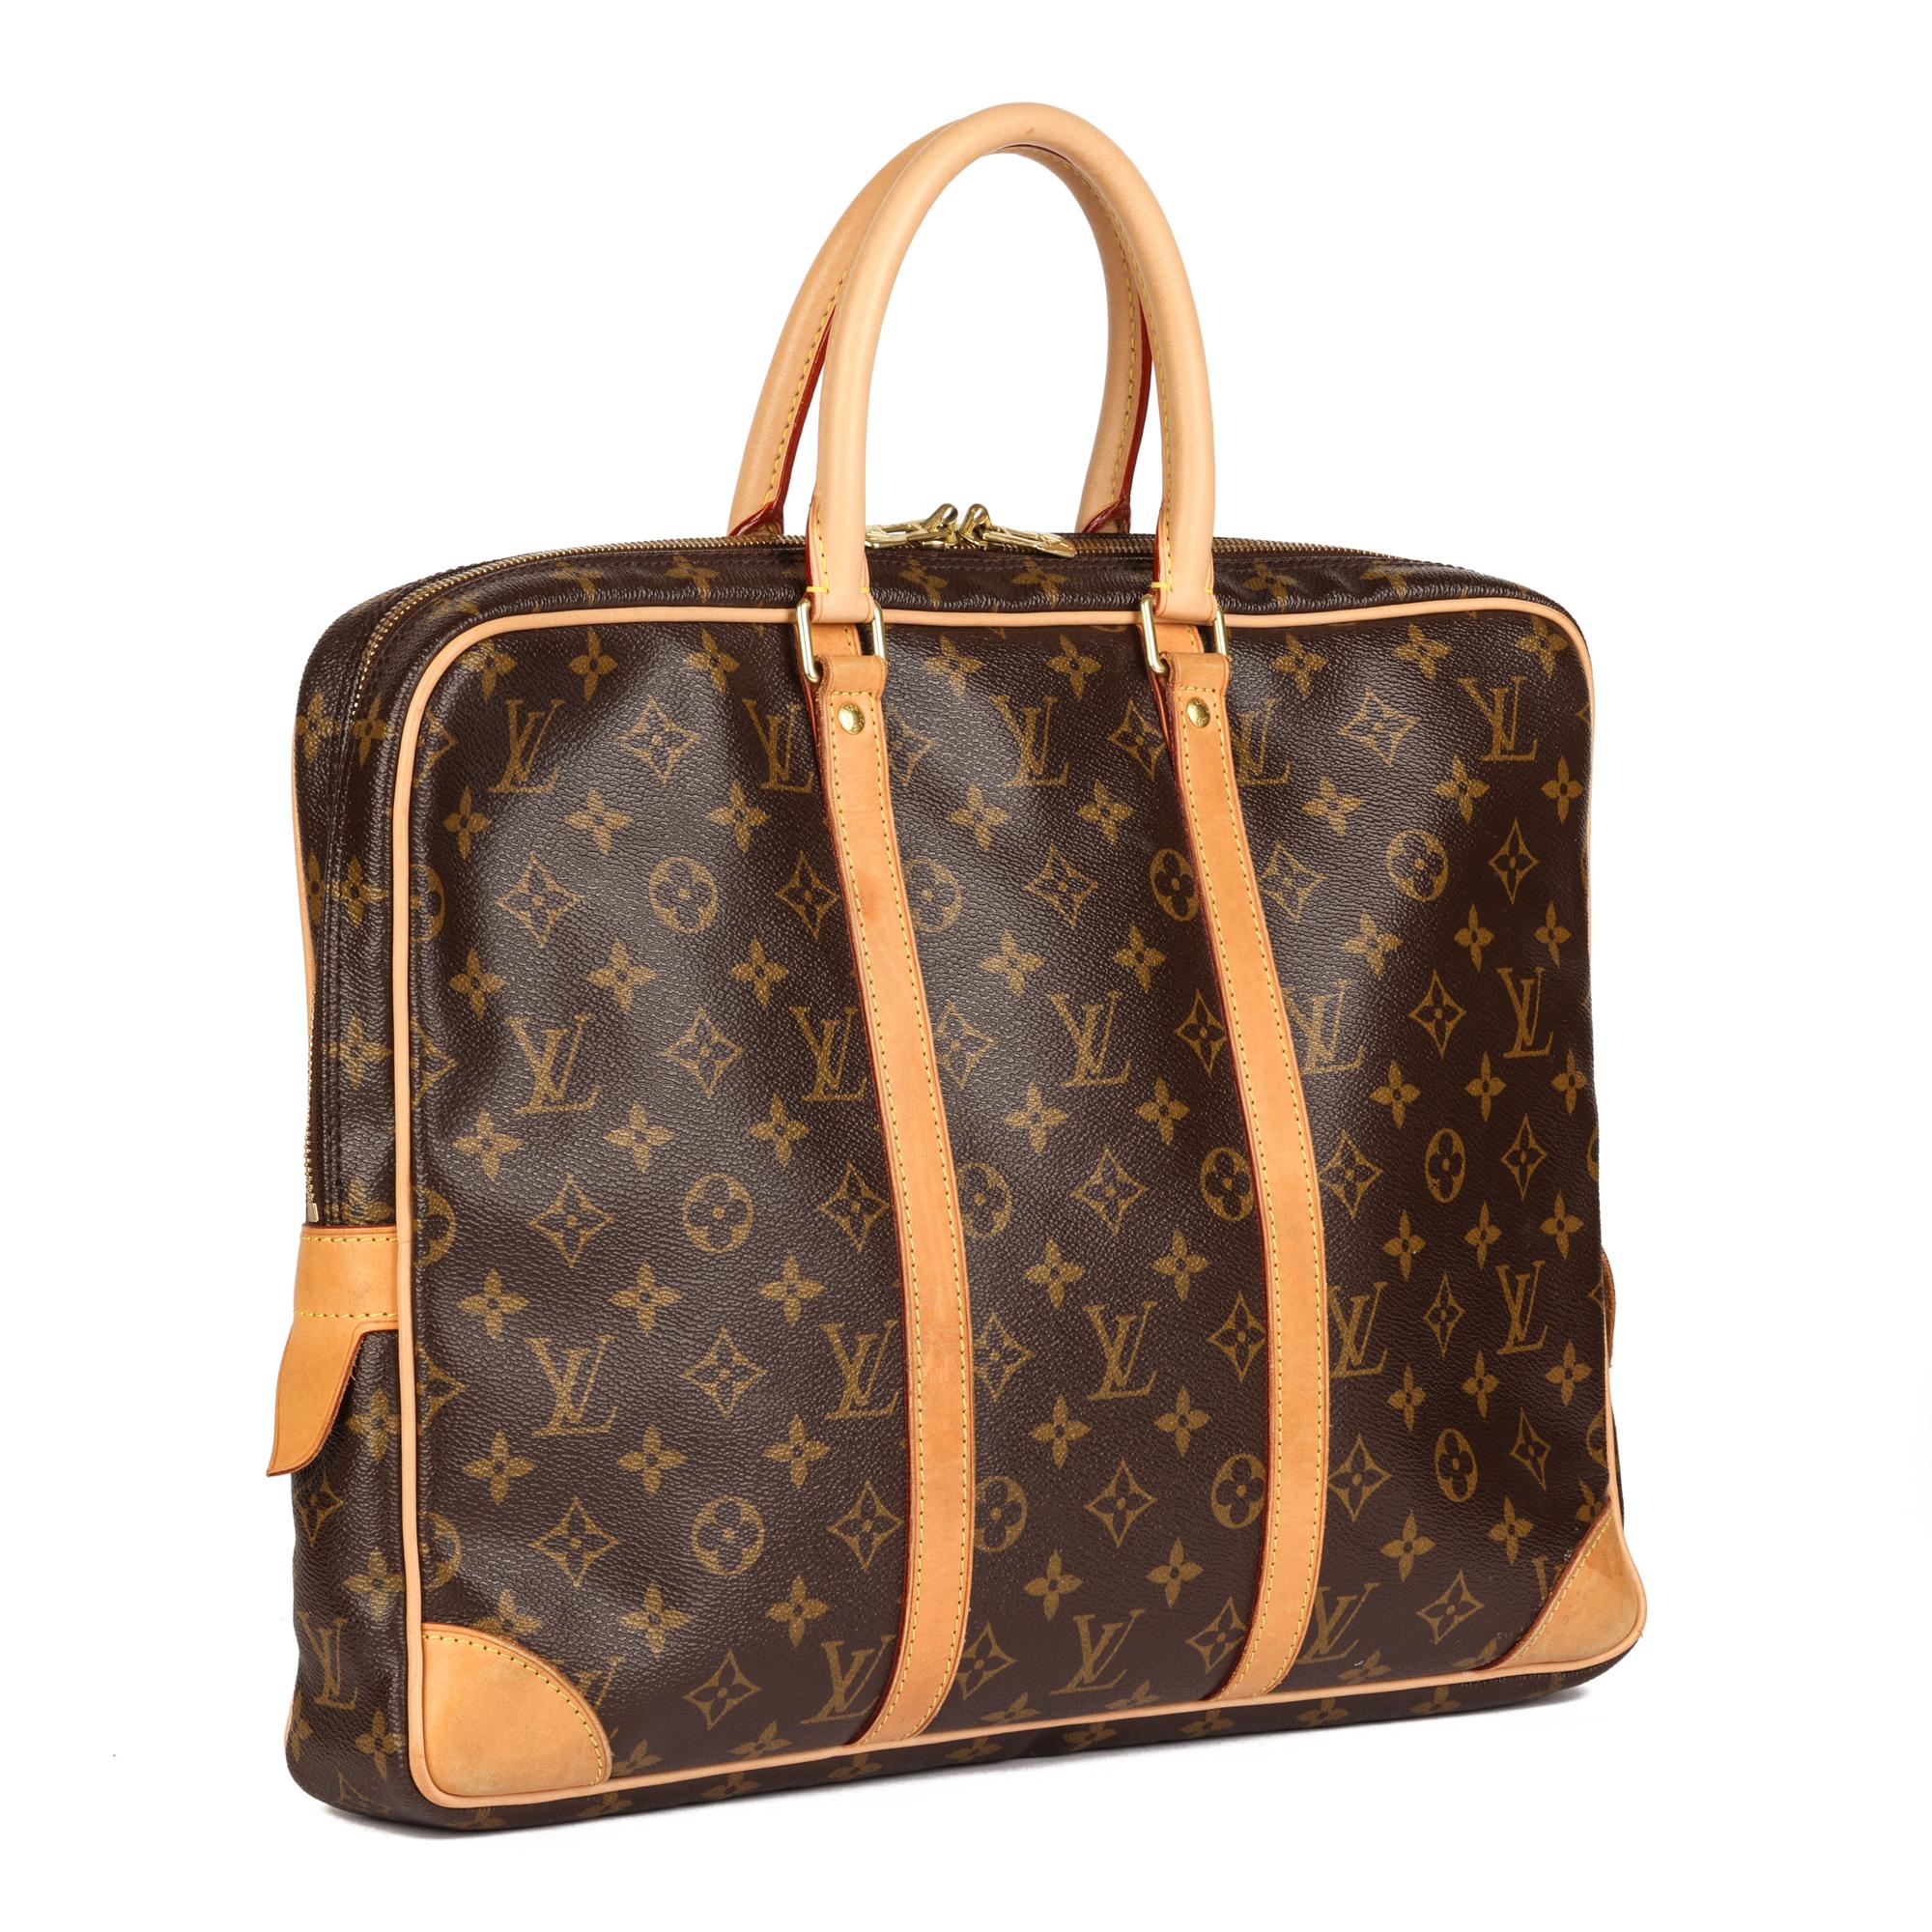 LOUIS VUITTON
Brown Monogram Coated Canvas & Vachetta Leather Vintage Porte Documents Voyage

Serial Number: BA2192
Age (Circa): 2012
Accompanied By: Louis Vuitton Dust Bag
Authenticity Details: Date Stamp (Made in France)
Gender: Unisex
Type: